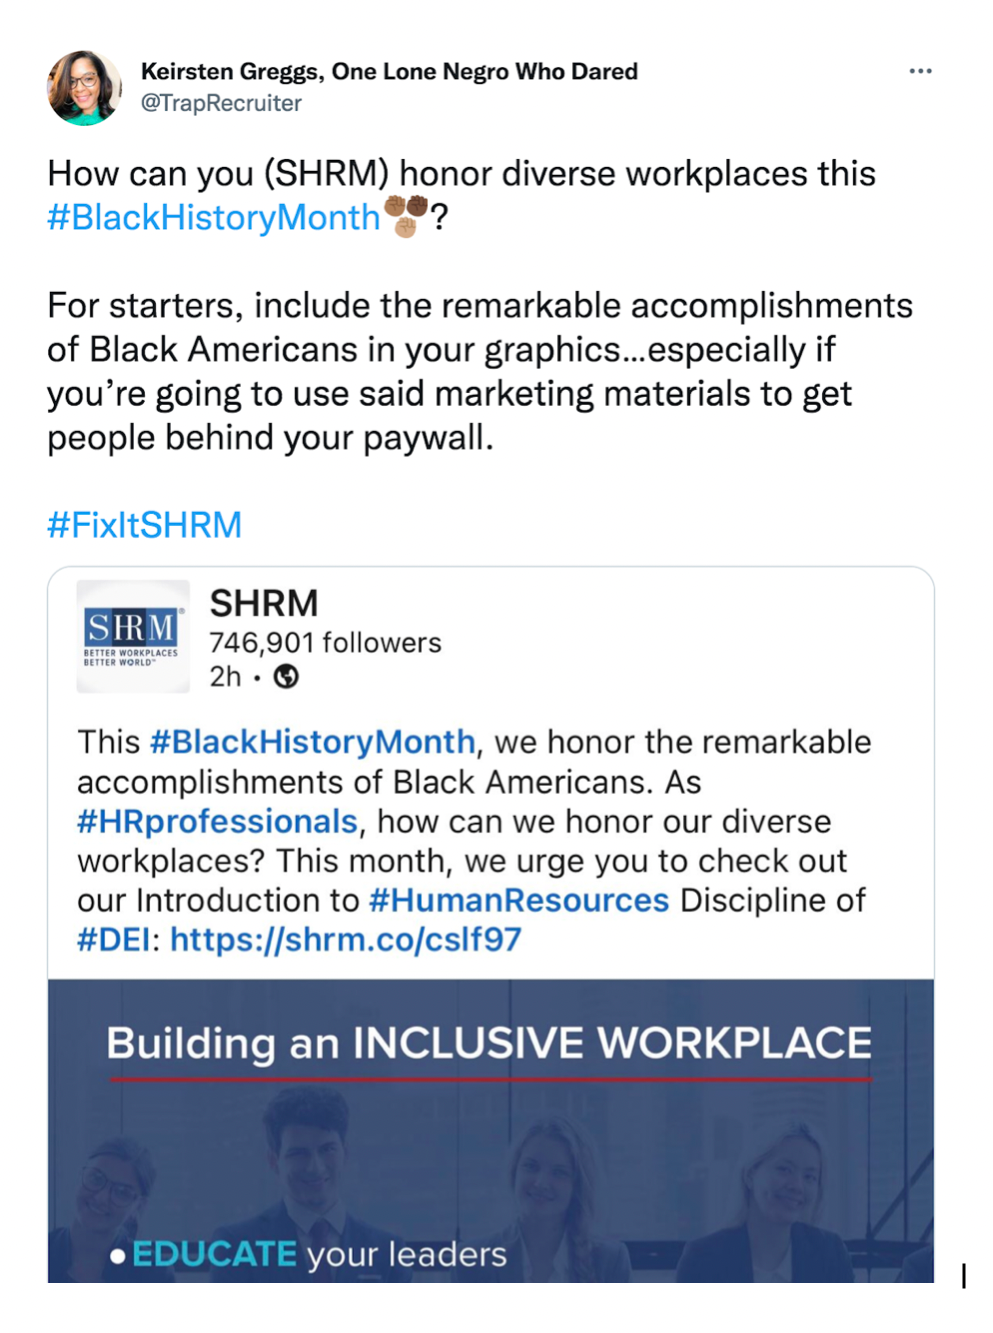 Screen grab of a tweet from Keirsten Greggs (@TrapRecruiter): "How can you (SHRM) honor diverse workplaces this #BlackHistoryMonth? For starters, include the remarkable accomplishments of Black Americans in your graphics...especially if you're going to use said marketing materials to get people behind your paywall. #FixItSHRM." The tweet is quote-tweeting SHRM. The original tweet says: This #BlackHistoryMonth, we honor the remarkable accomplishments of Black Americans. As #HRprofessionals, ho can we honor our diverse workplaces? This month, we urge you to check out our introduction to #HumanResources Discipline of #DEI